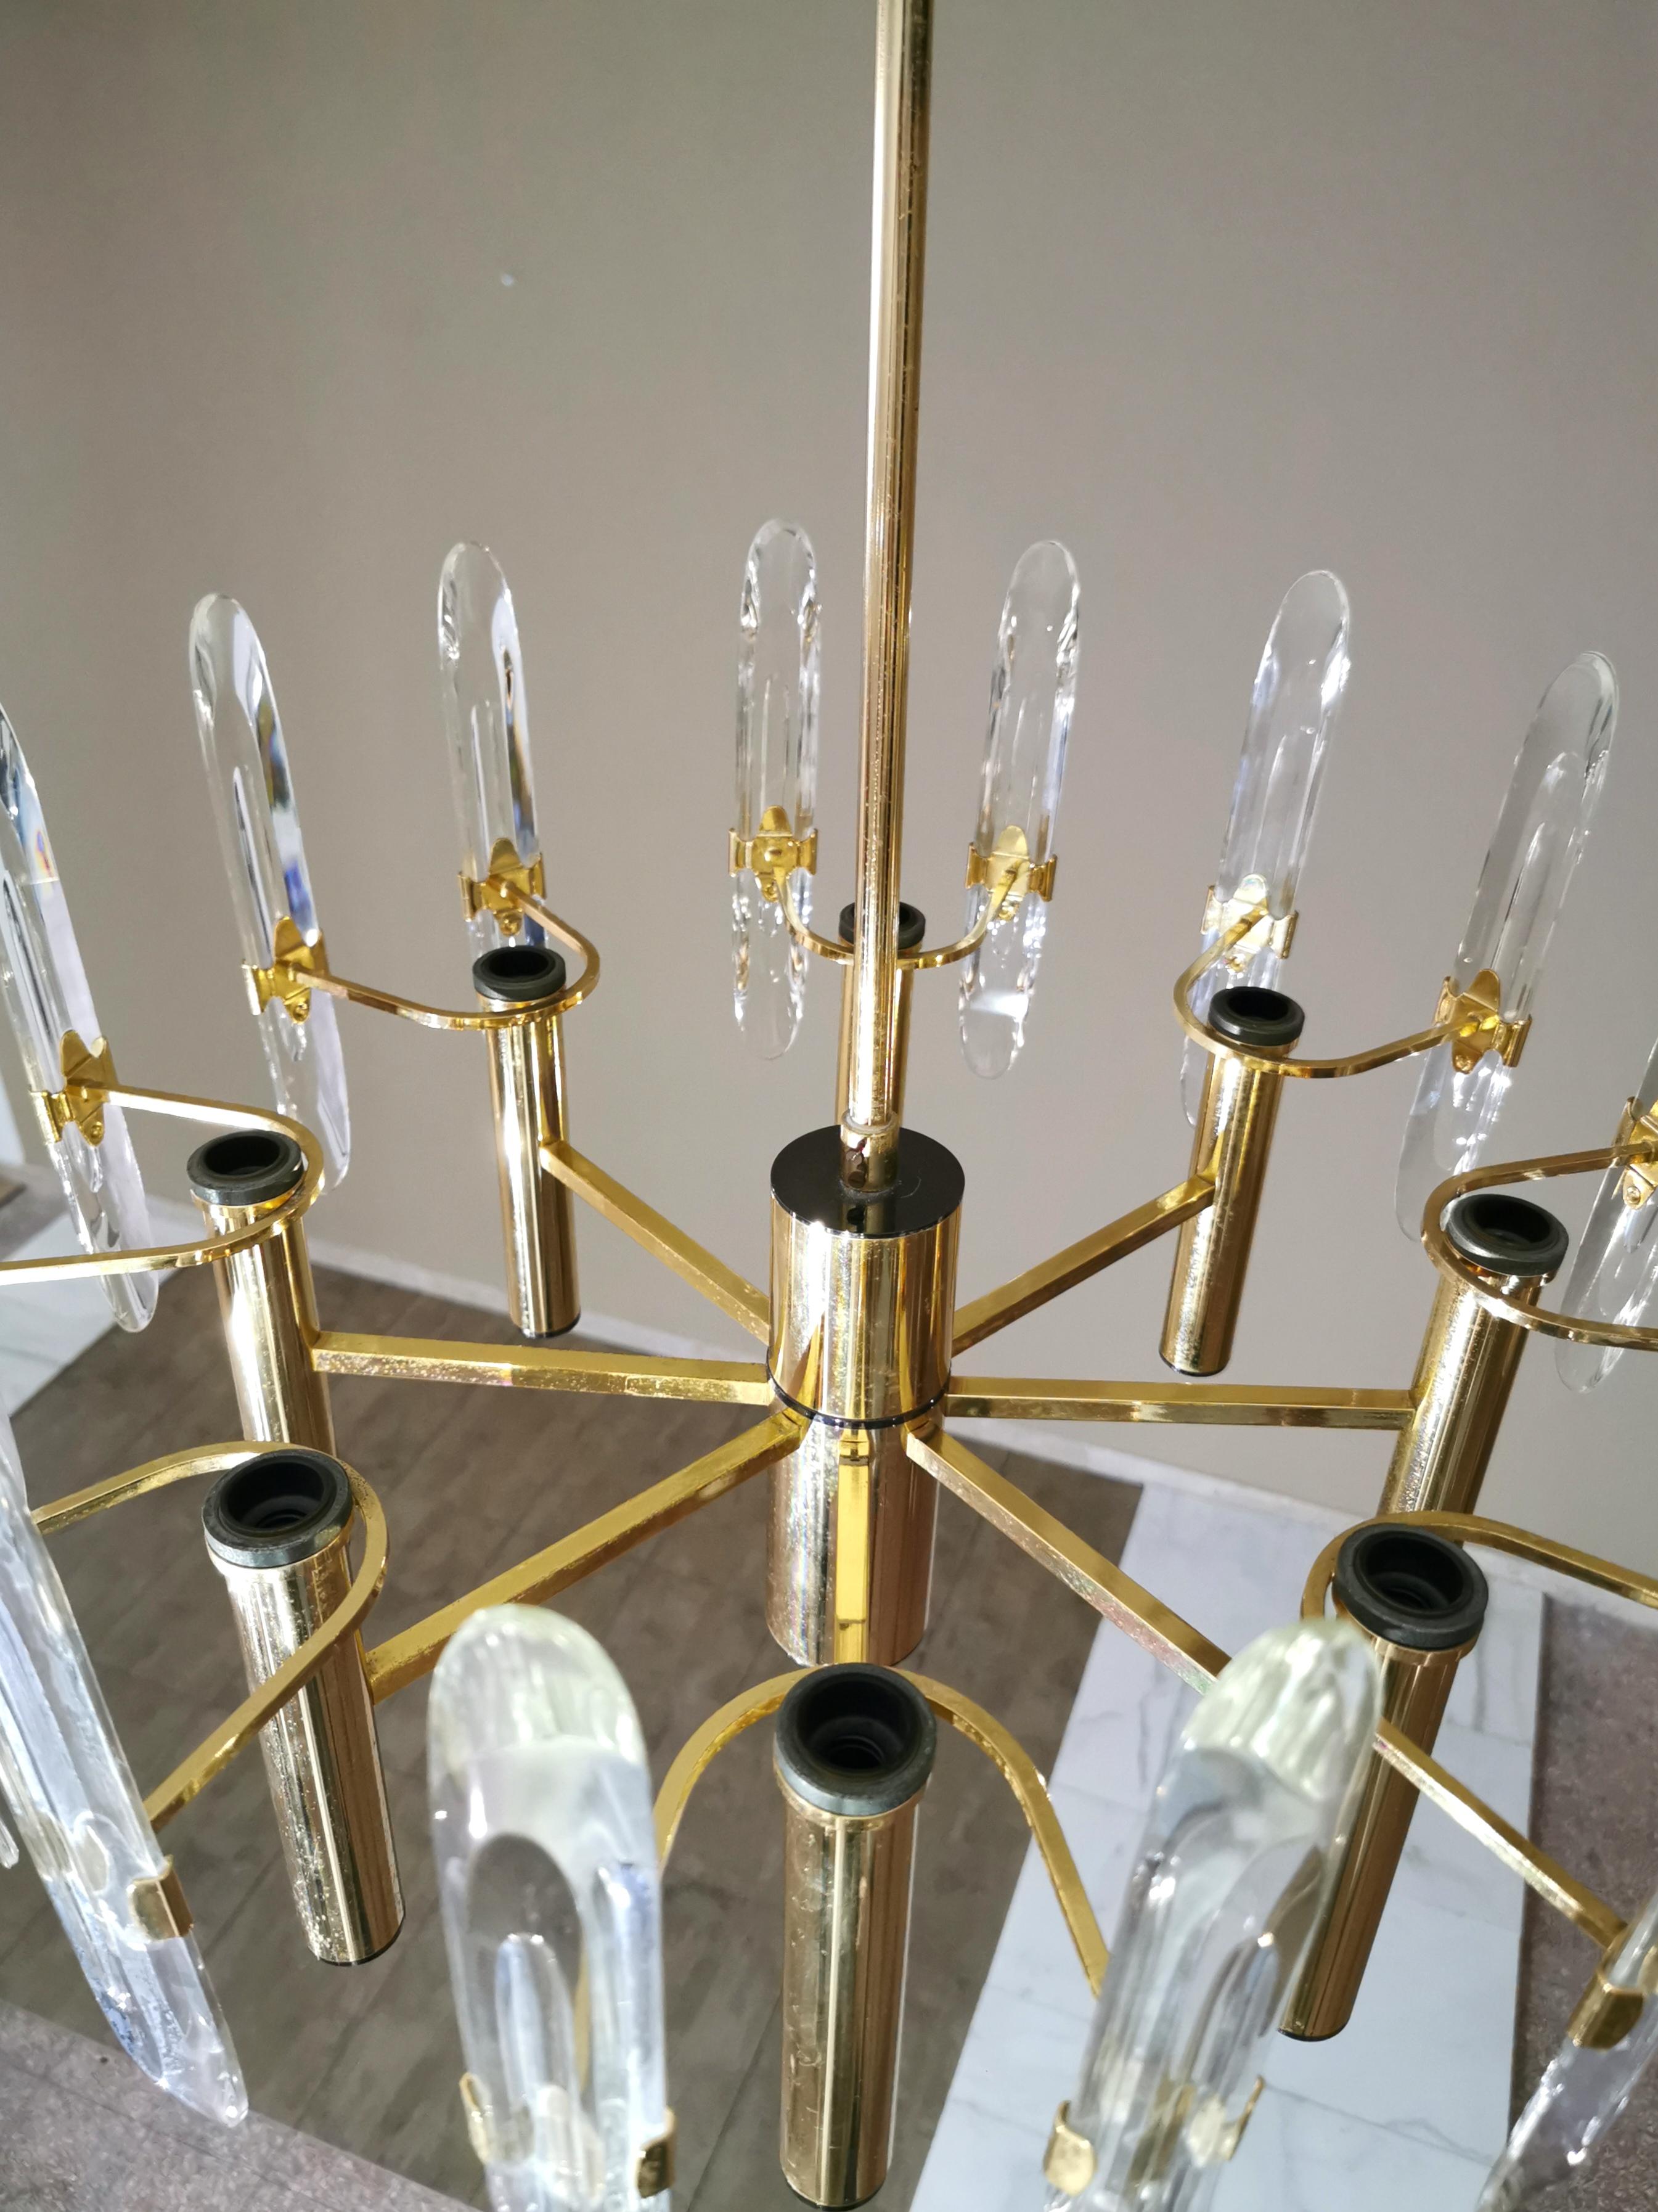 Set of 2 elegant chandeliers by the Italian designer Gaetano Sciolari. each single chandelier with 8 lights and 16 beveled crystal prism glasses in total. Contains 8 candelabra decorated with two glasses in the shape of ellipses. Structure in